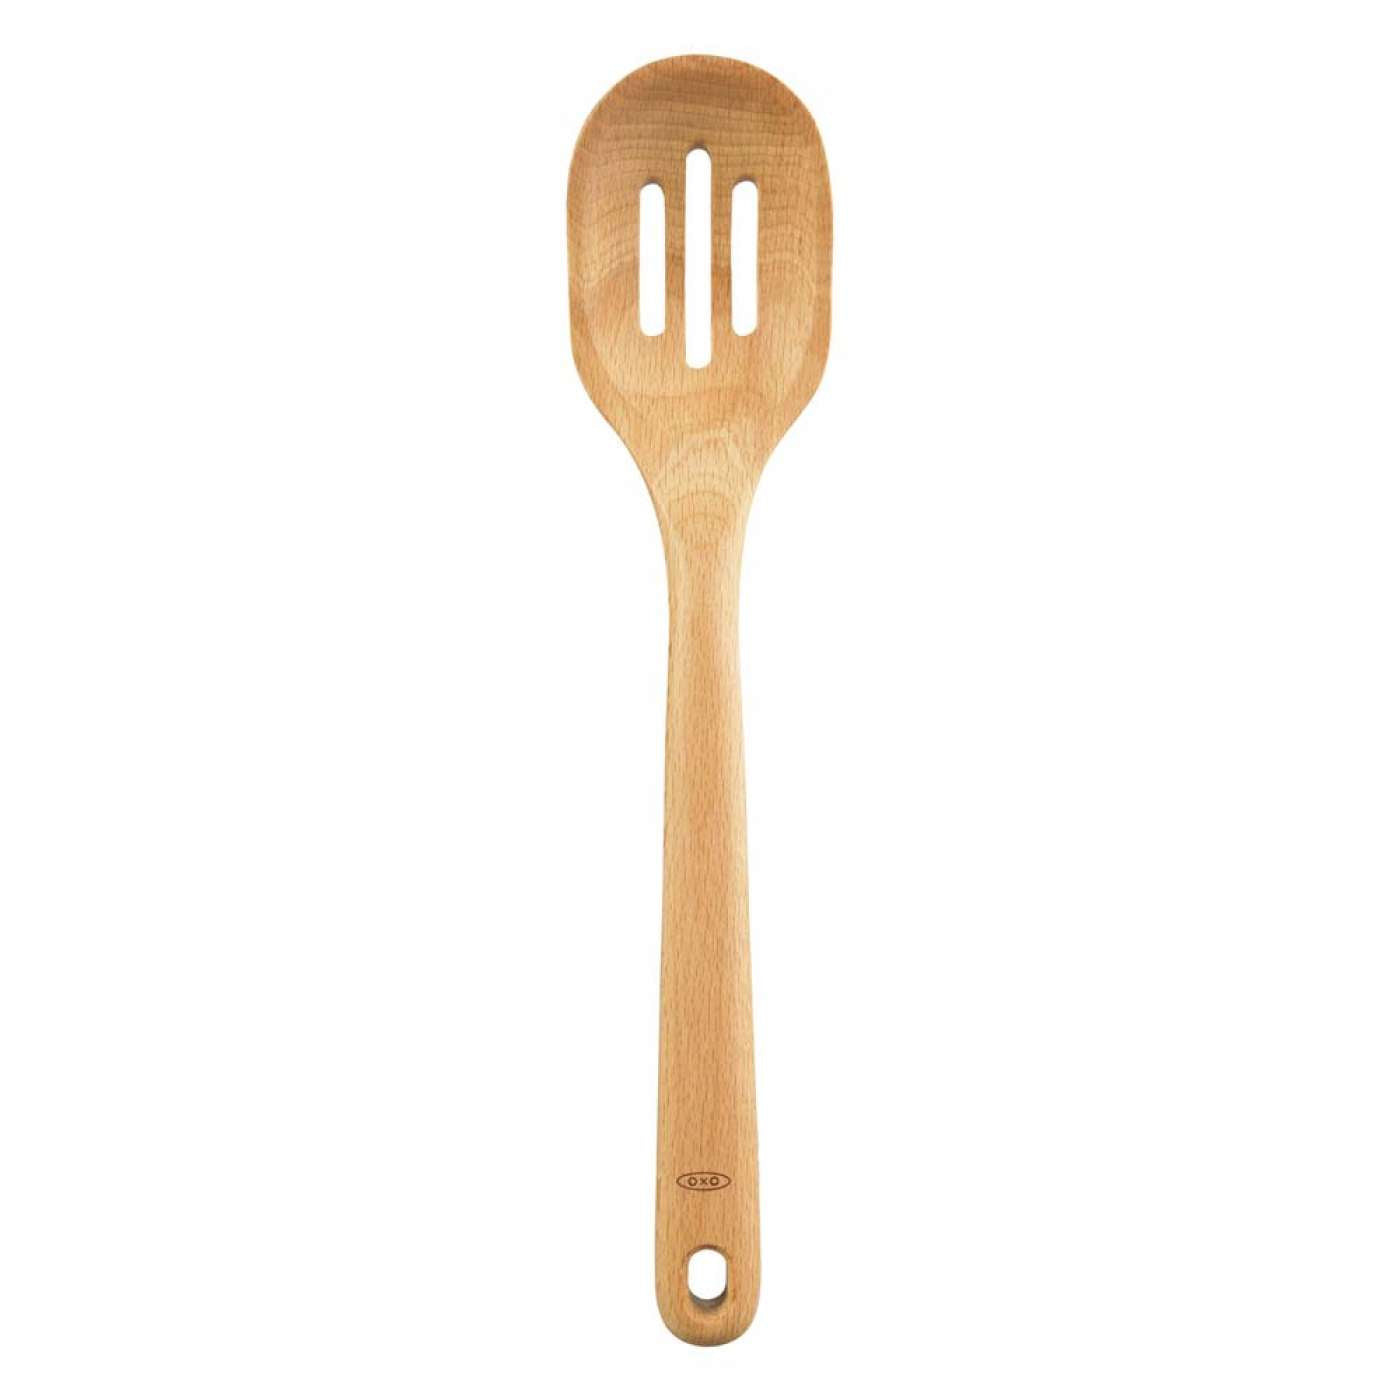 OXO GOOD GRIPS OXO WOODEN SLOTTED SPOON